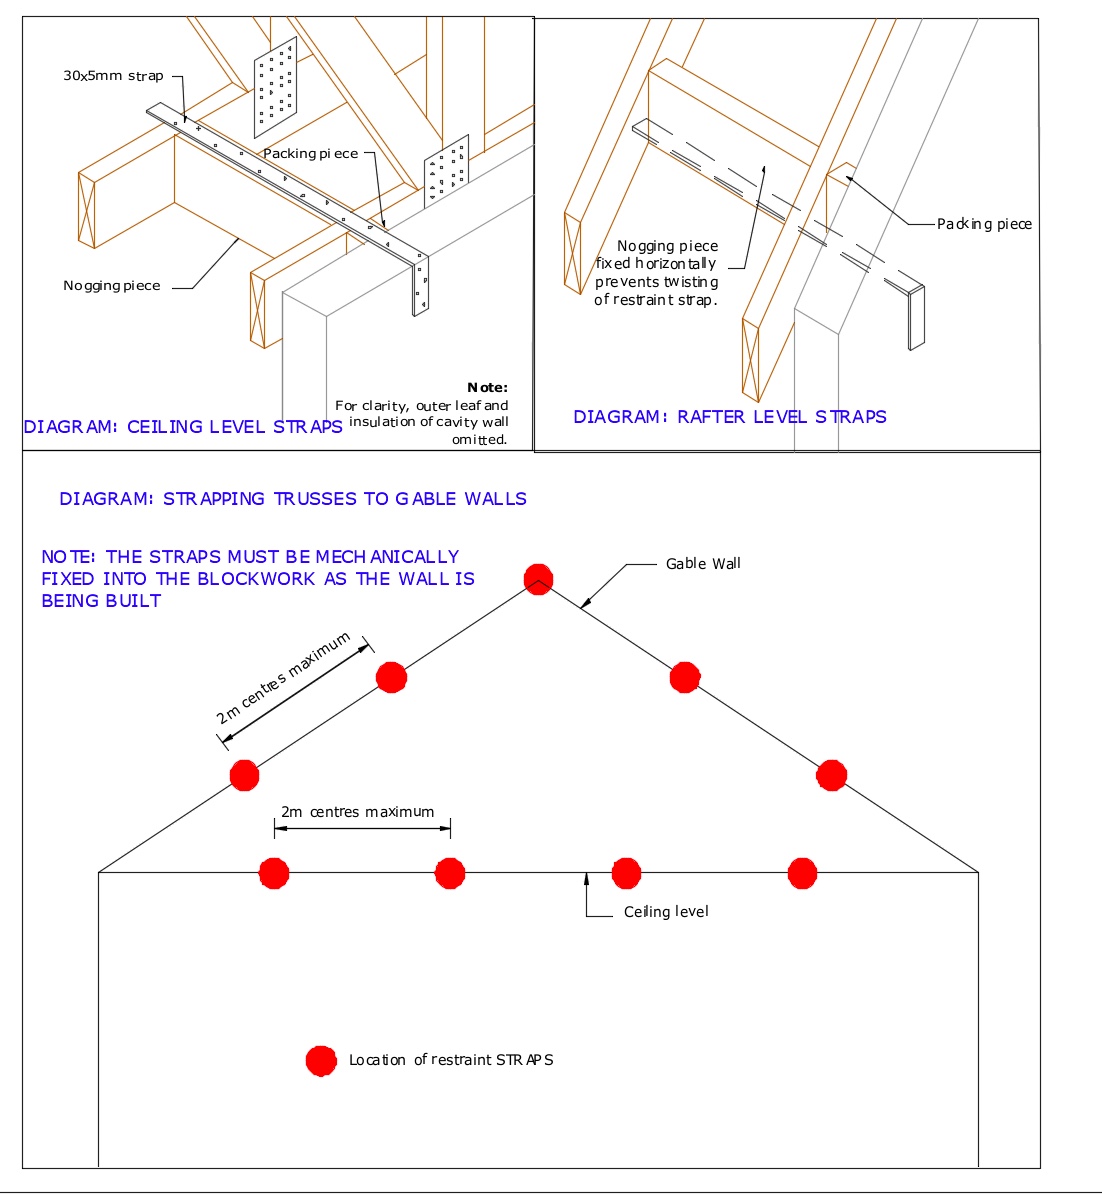 Diagram D4 - Strapping trusses to gable ends at ceiling and rafter level